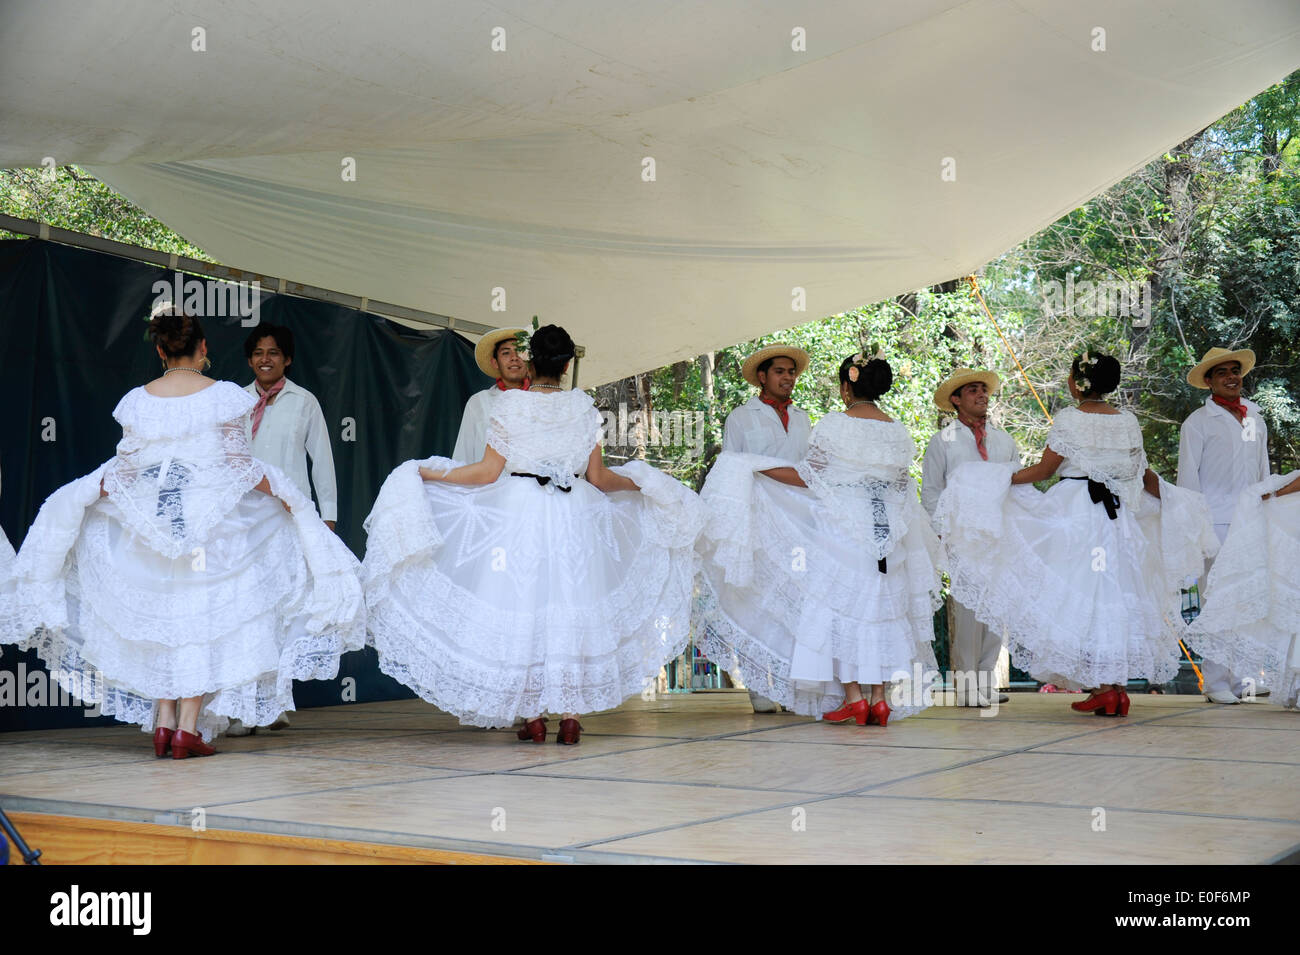 High school dance class exhibition of traditional Mexican dances in Chapultepec Park, Mexico City, Mexico. Stock Photo